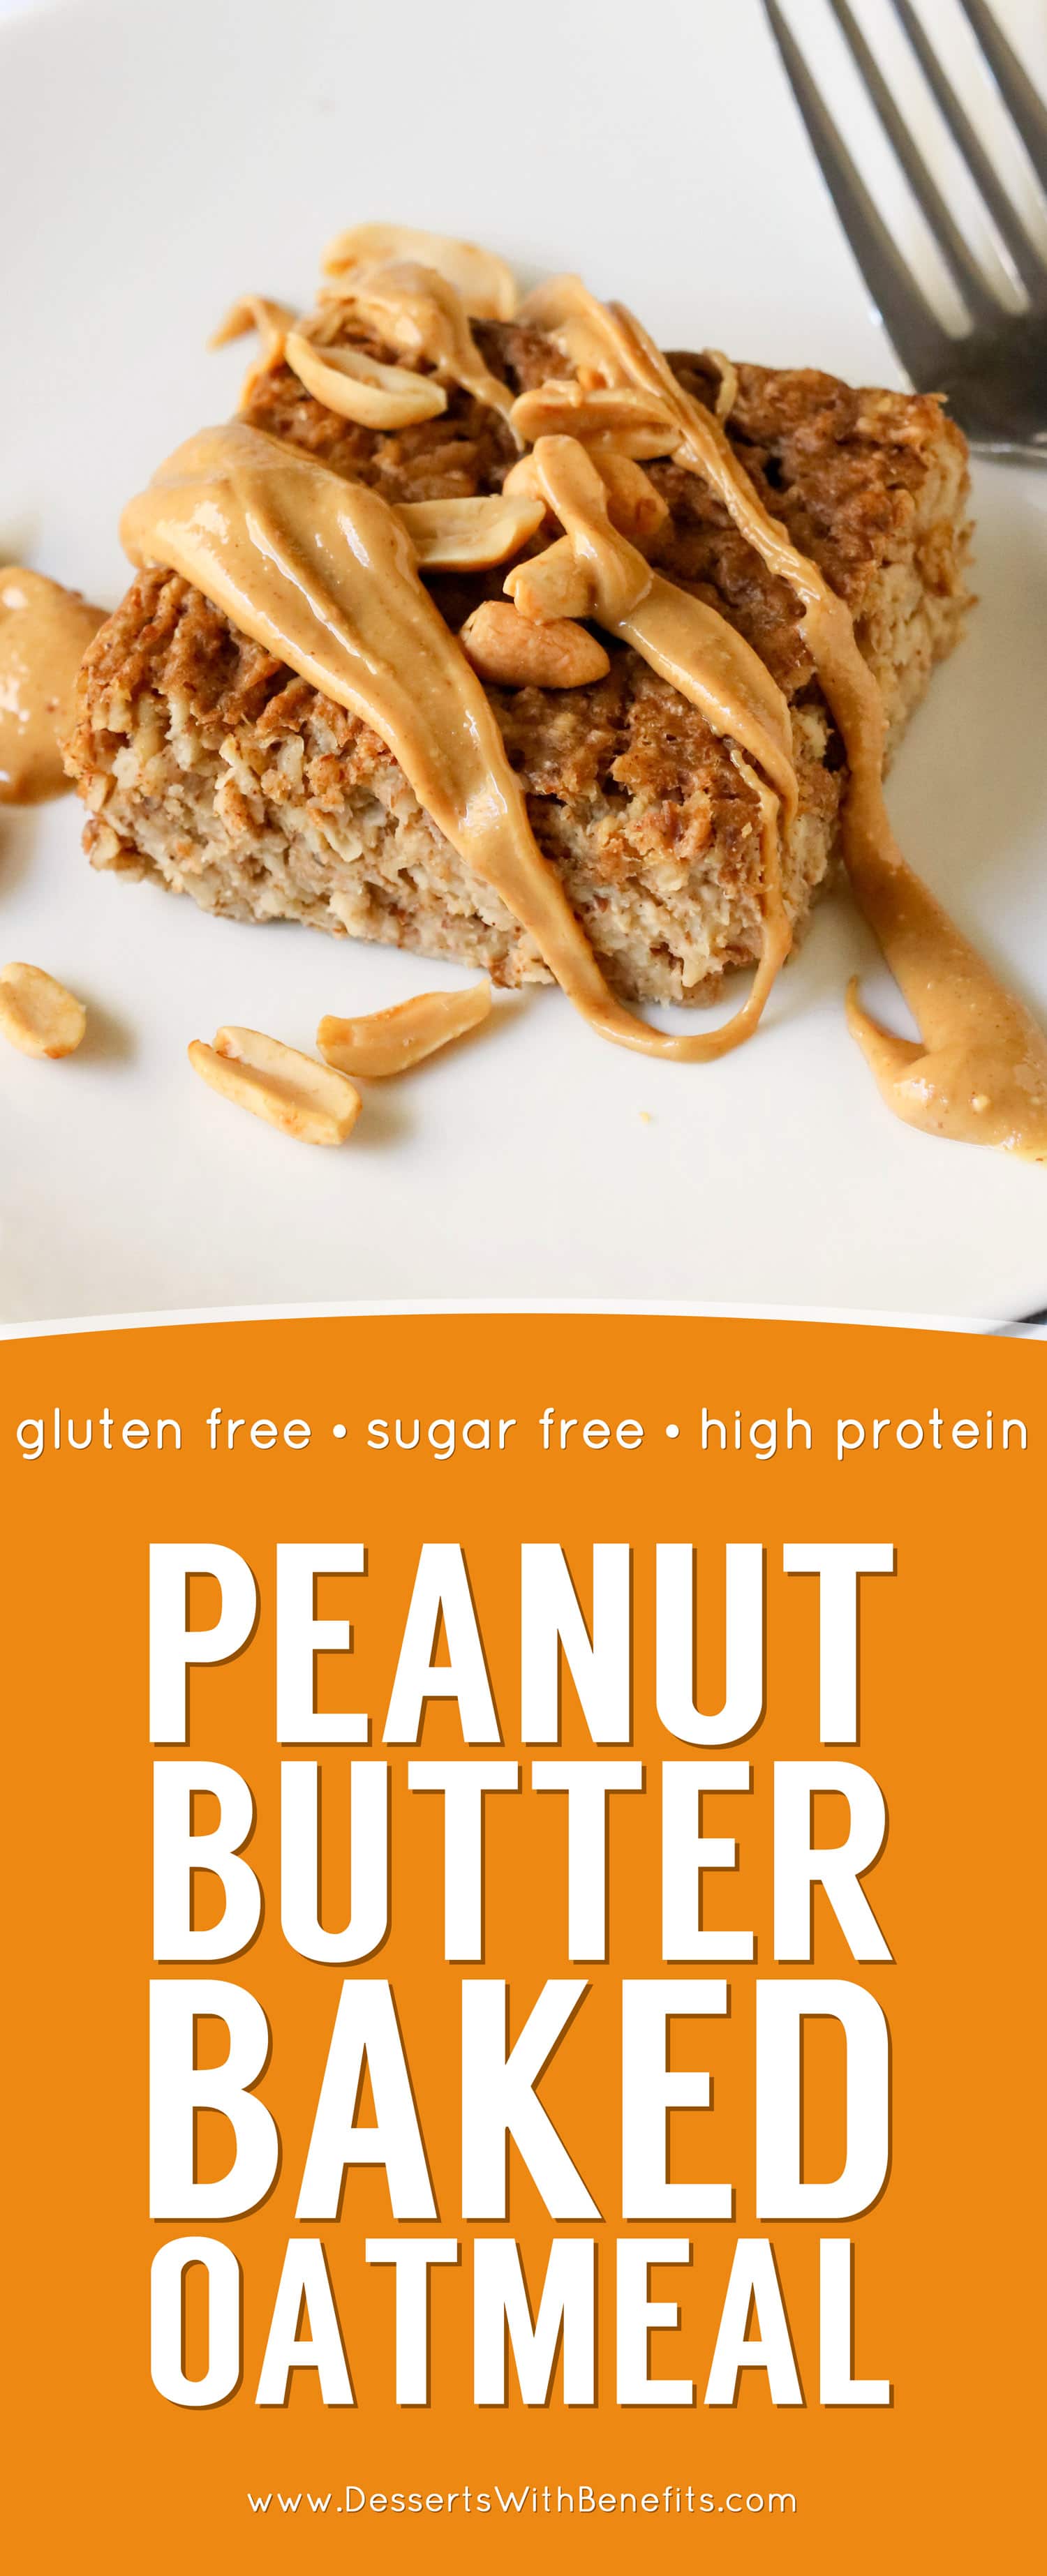 This healthy Peanut Butter Baked Oatmeal is soft and light, yet packed with protein, fiber, and healthy fats, and none of the added sugar! Plus, it's sugar free, gluten free, dairy free, and vegan too!